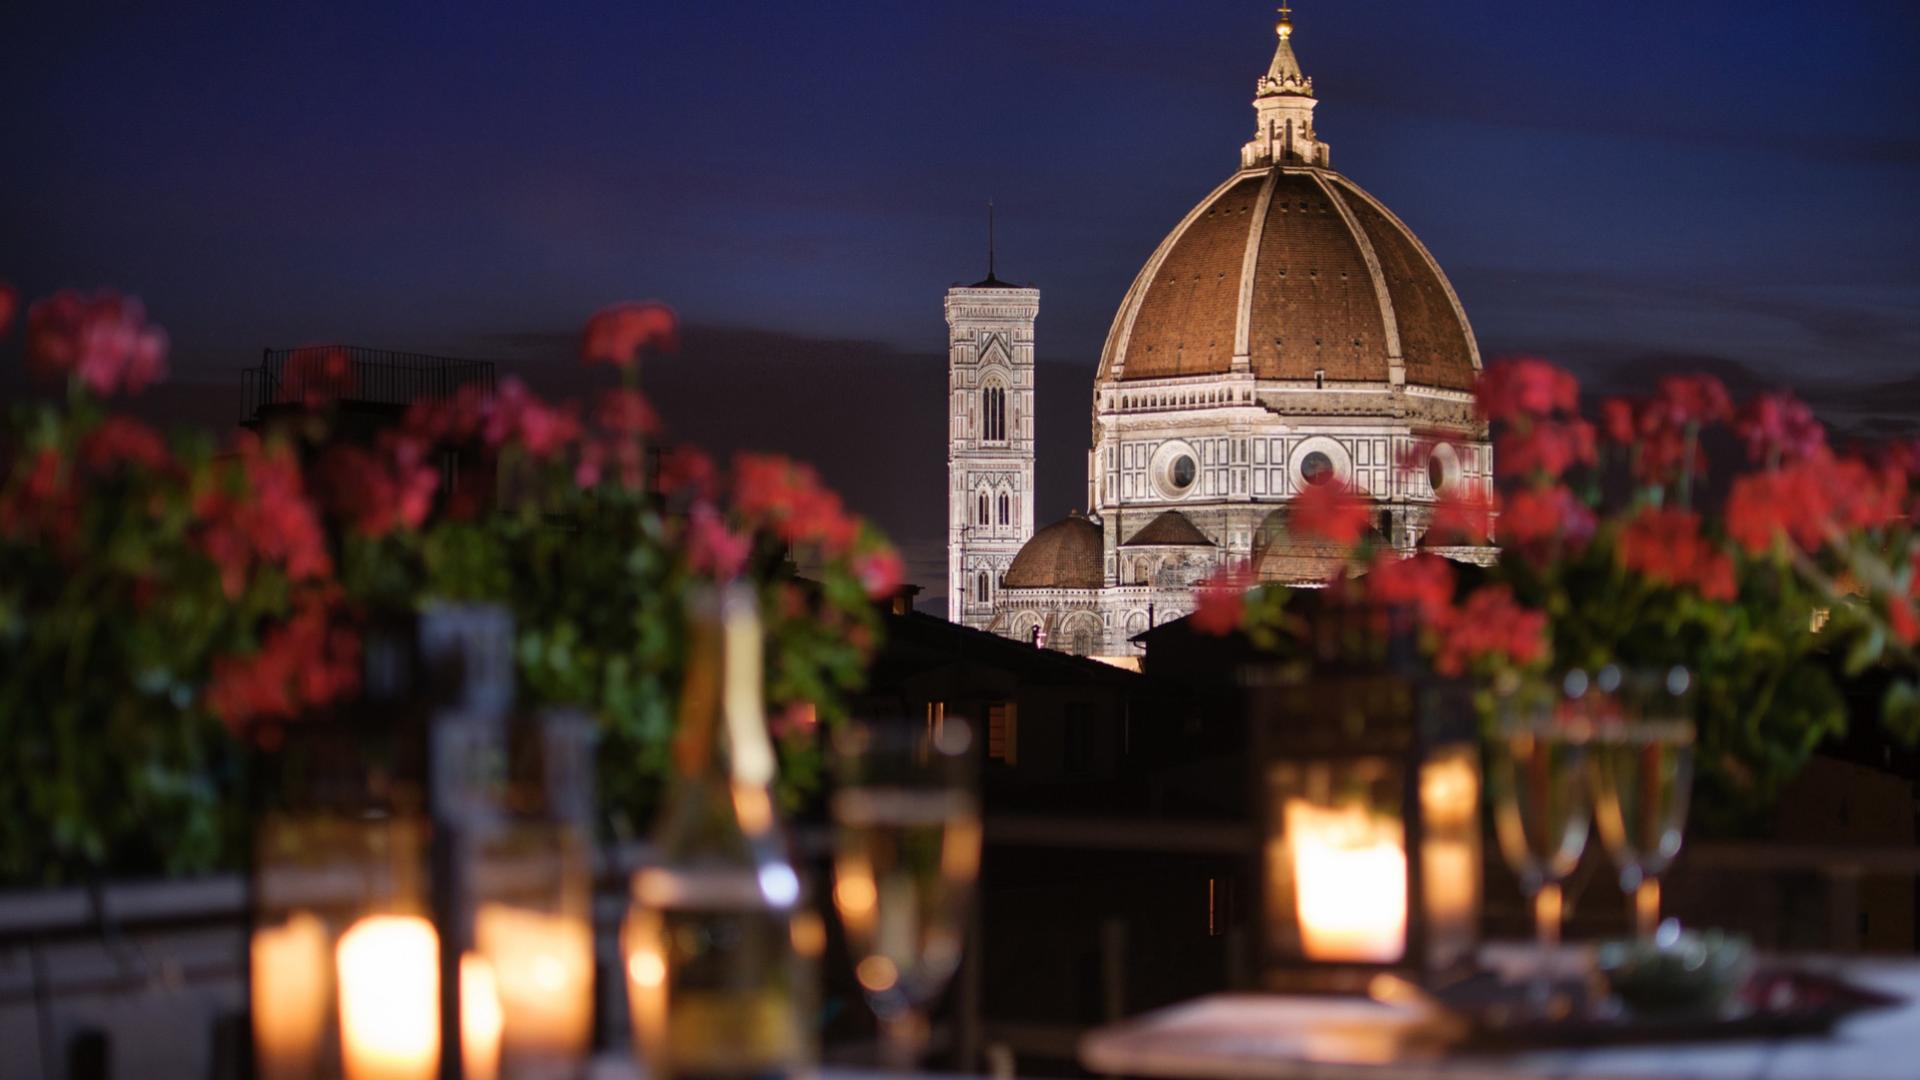 Night view of Florence Cathedral with candles and flowers in the foreground.